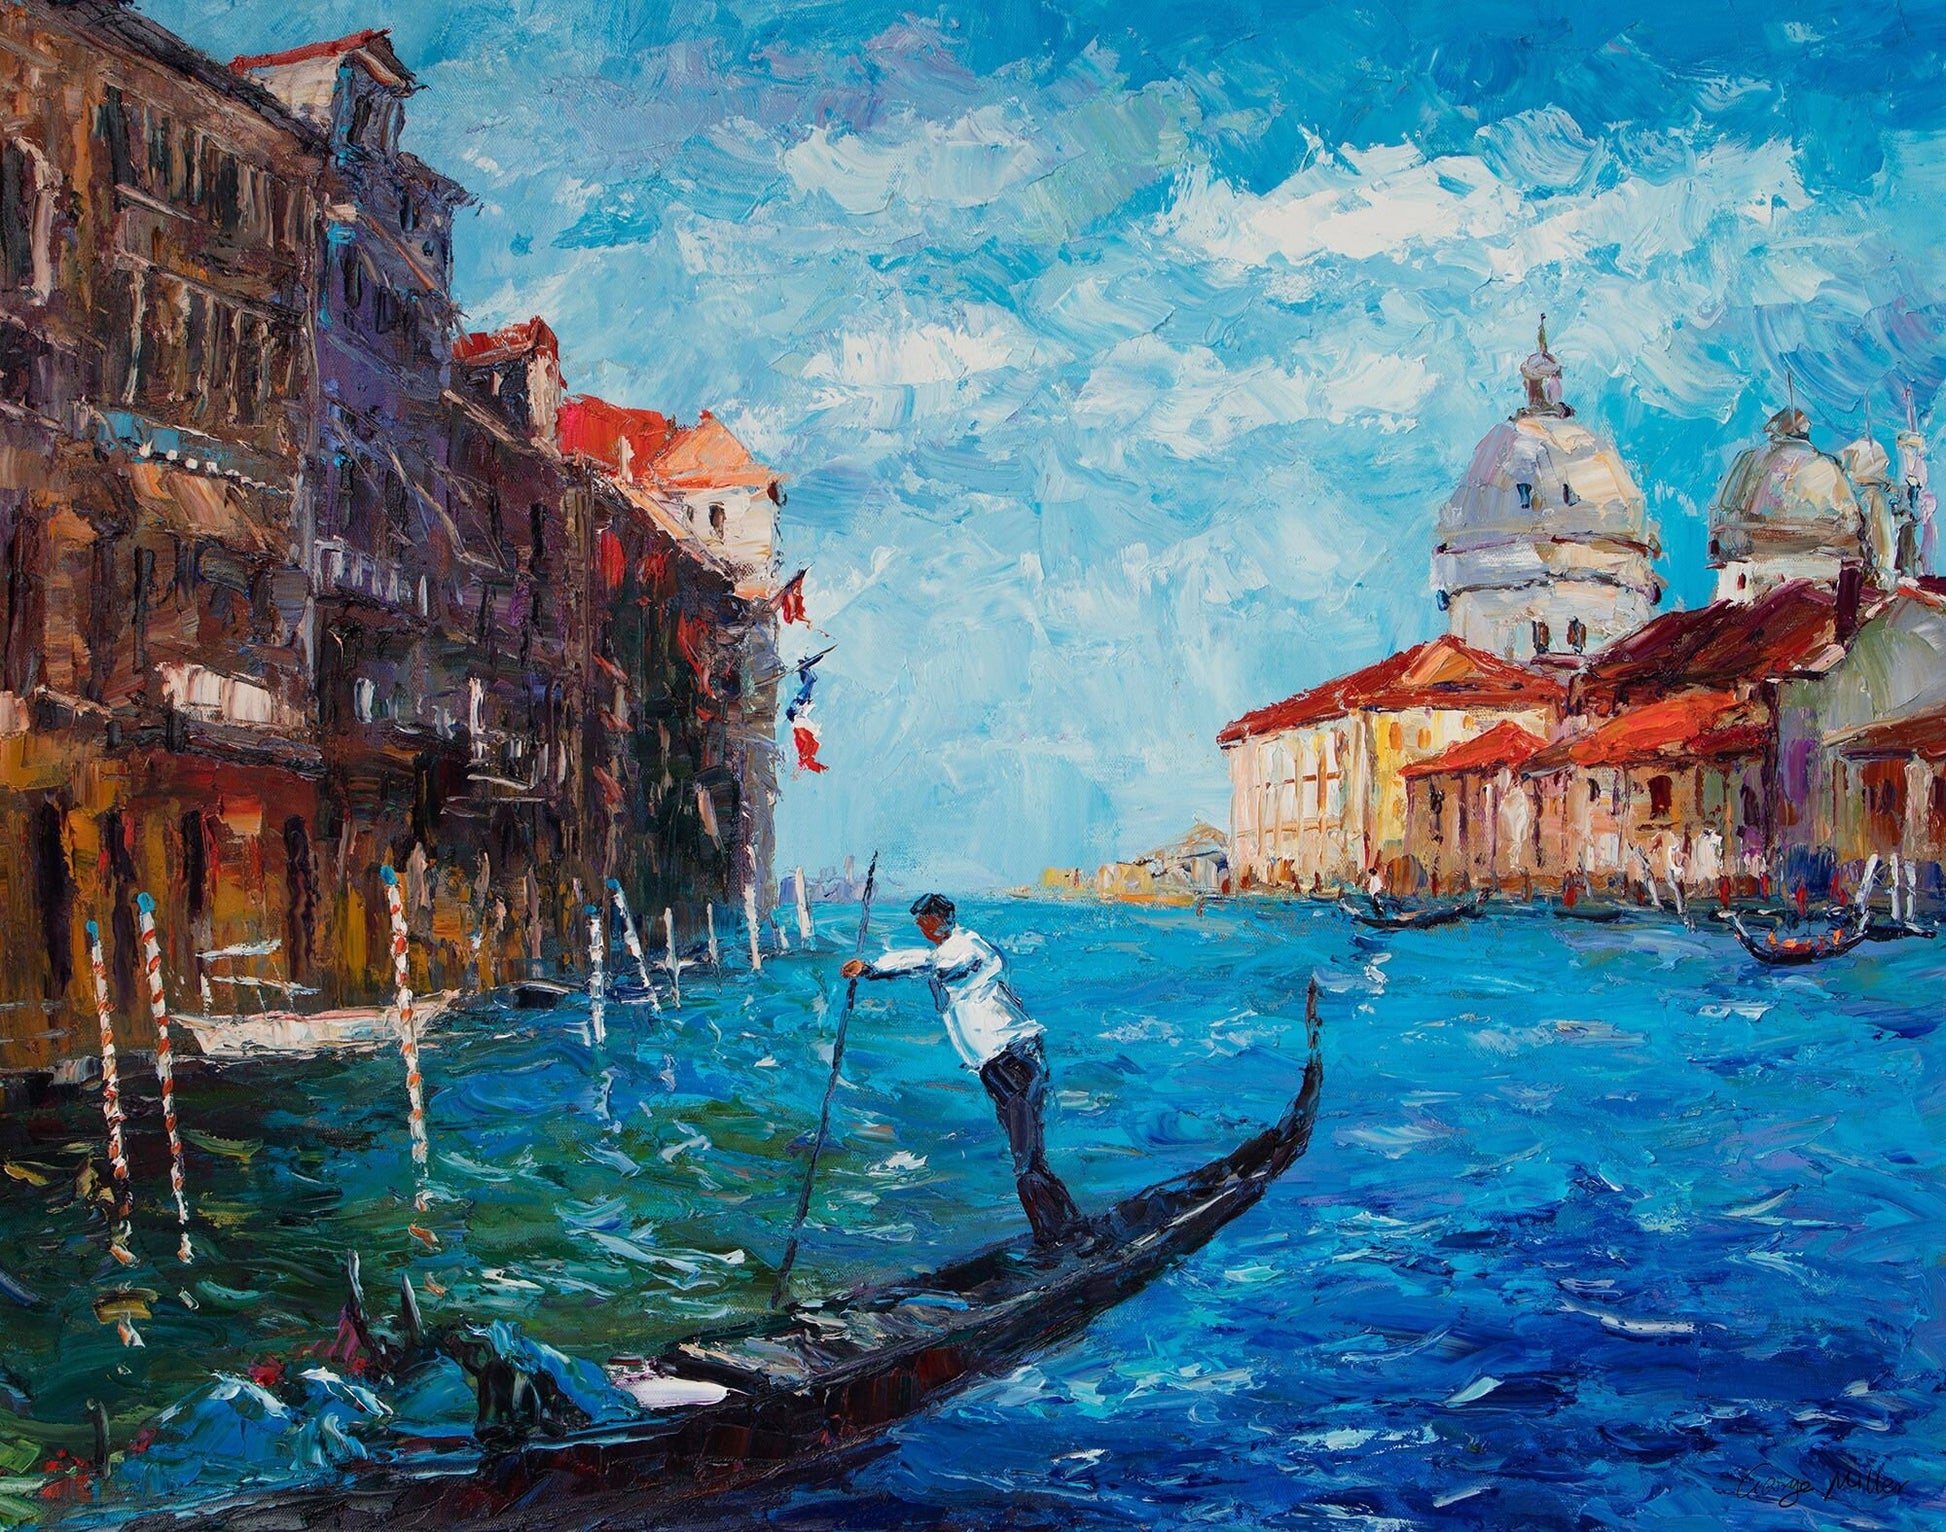 Large Painting Venice Grand Cancal Gondora, Modern Painting, Oil Painting Original, Canvas Art, Canvas Wall Decor, Oil Painting Landscape,